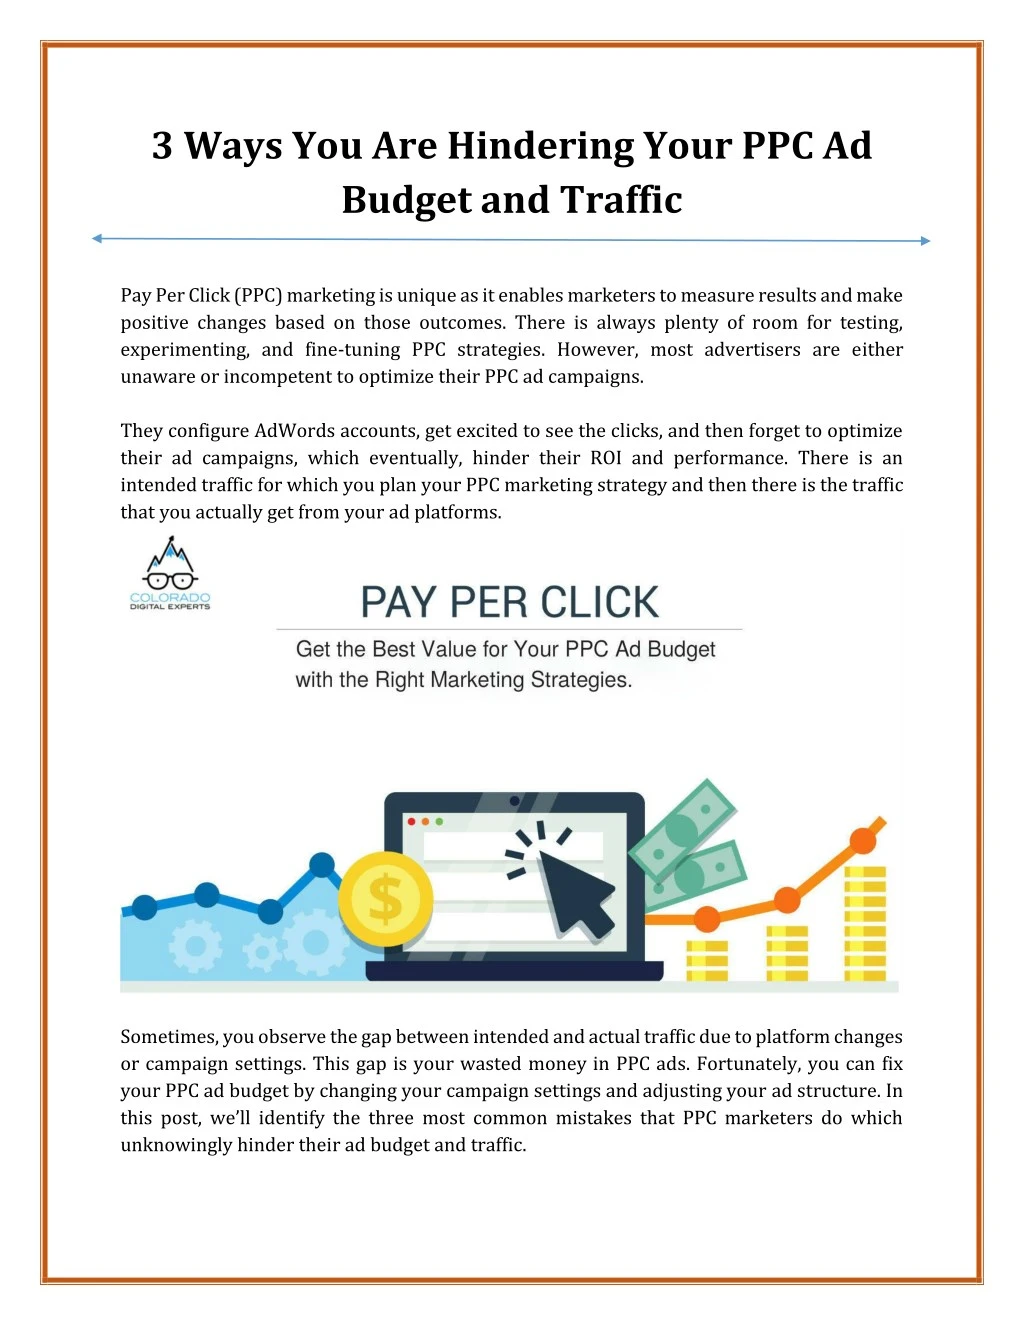 3 ways you are hindering your ppc ad budget